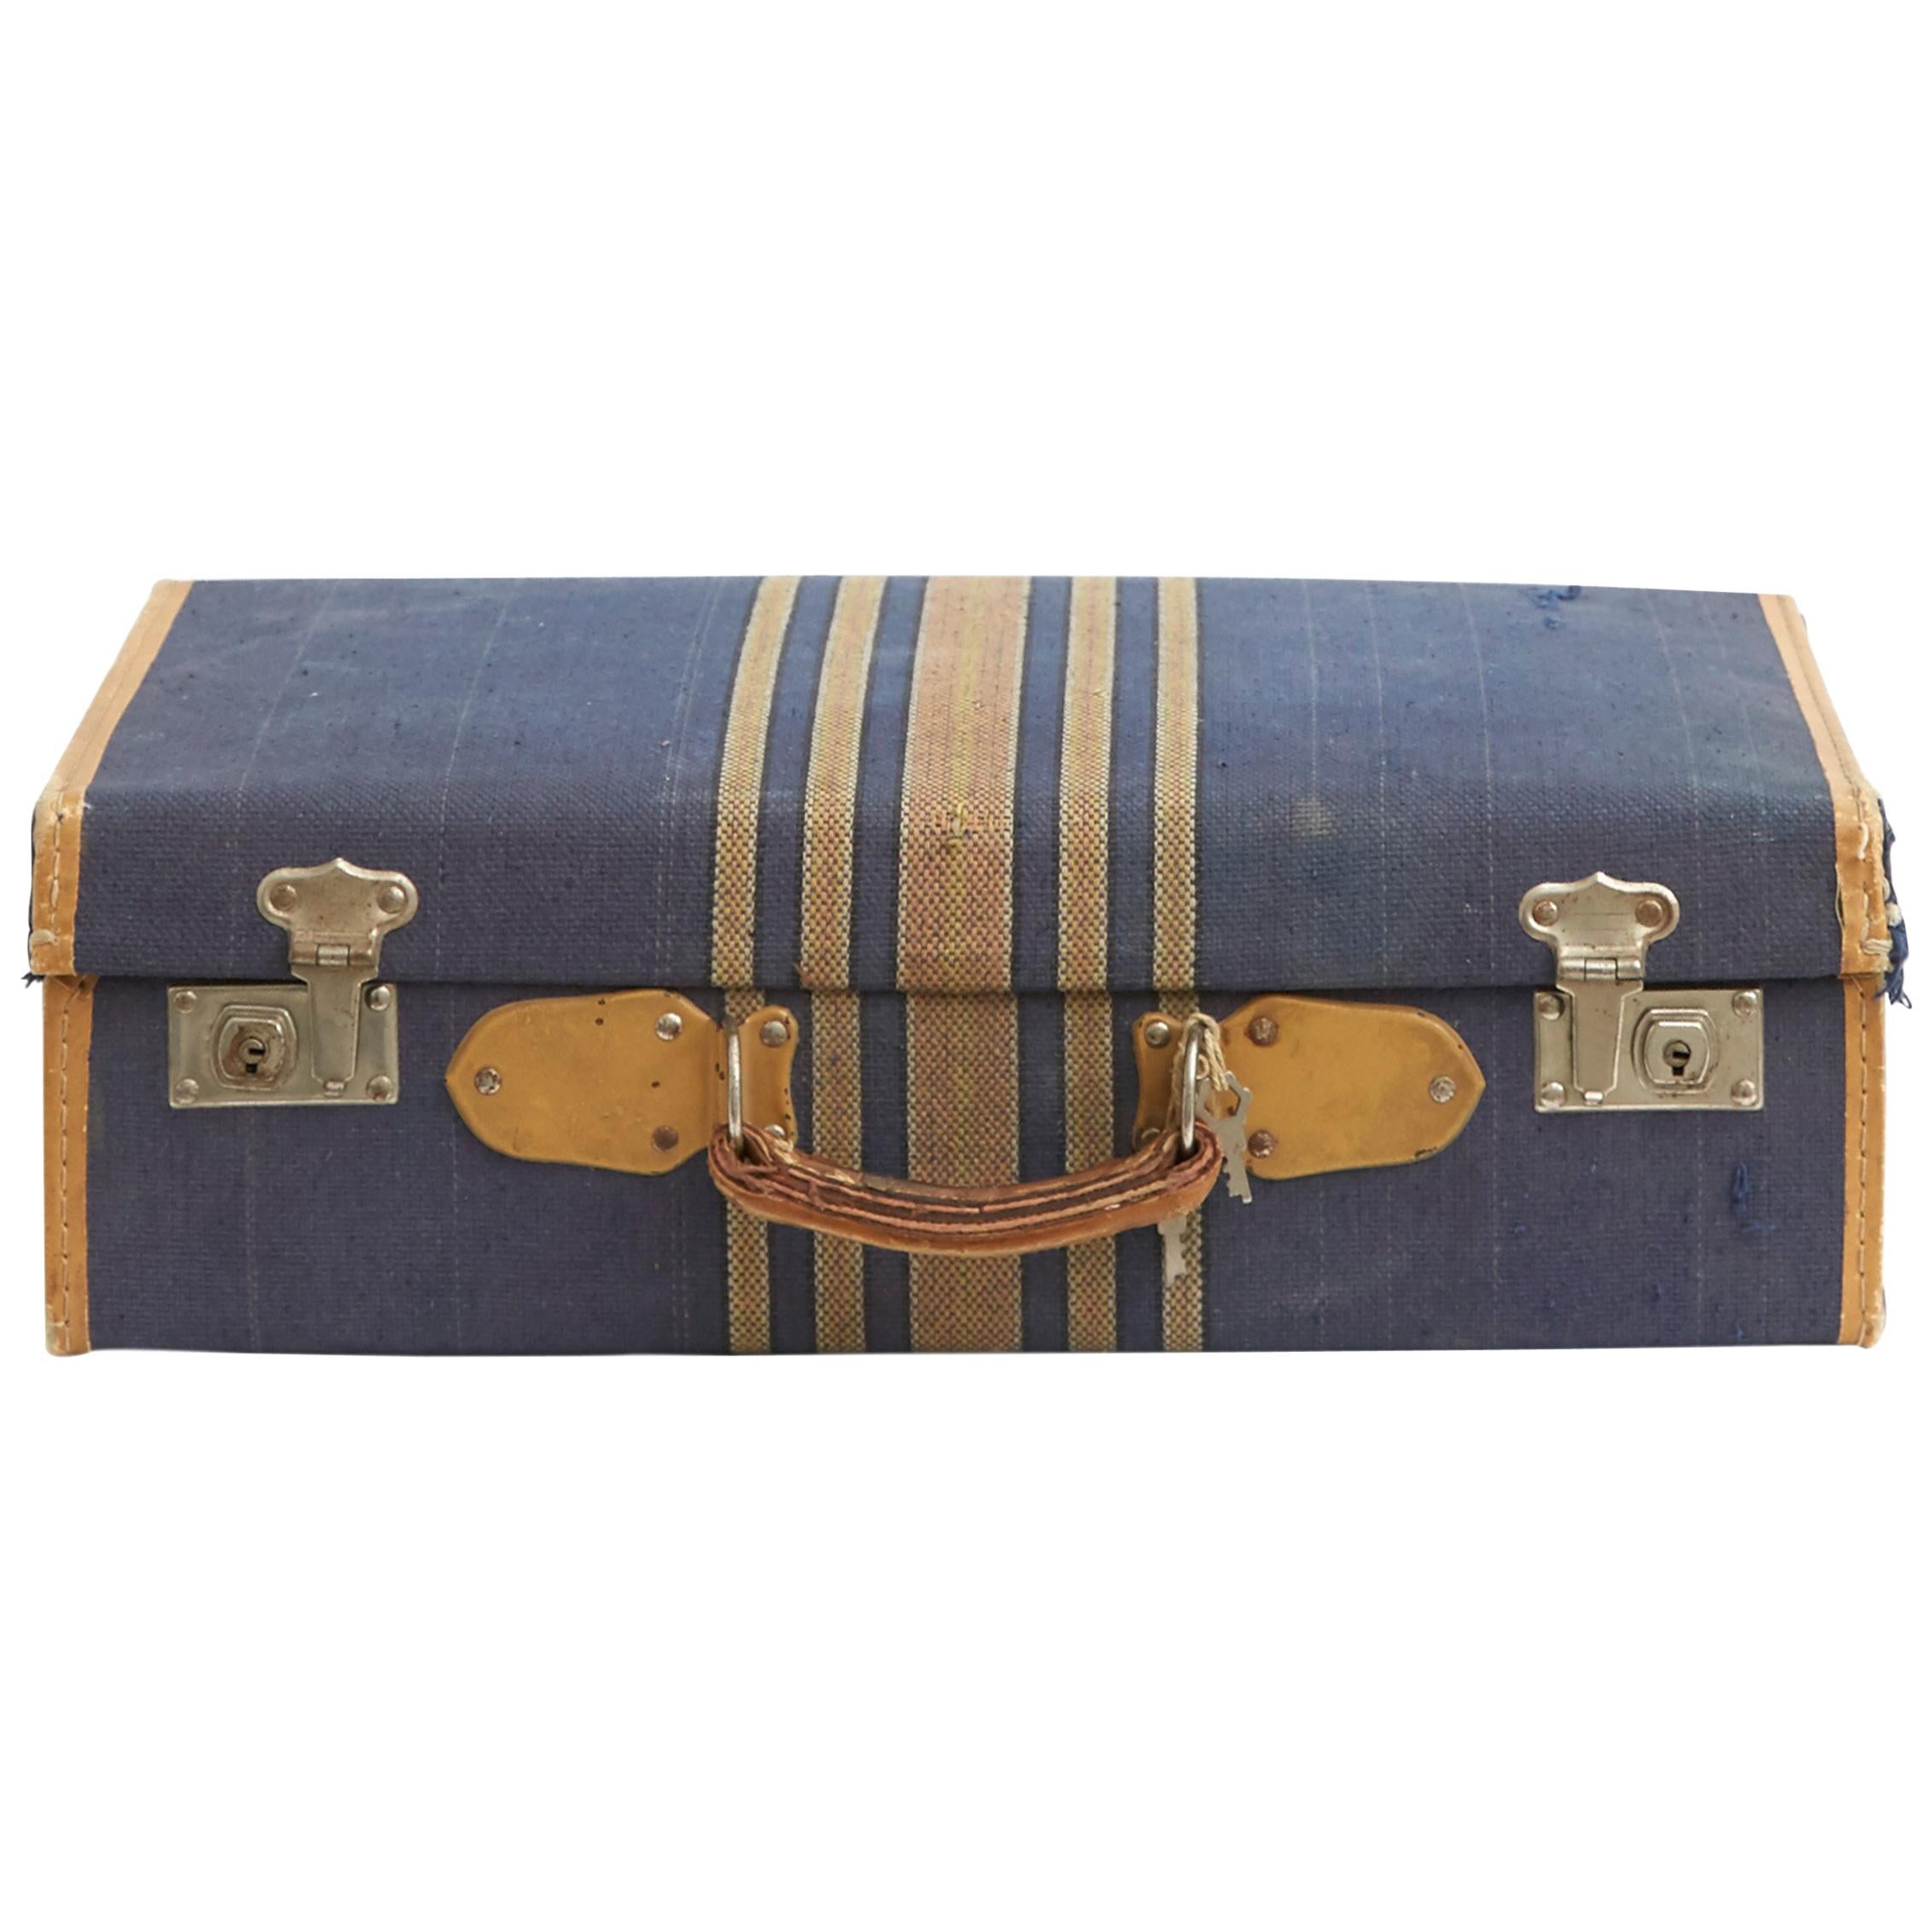 Tweed Wrapped Suitcase with Leather Handle